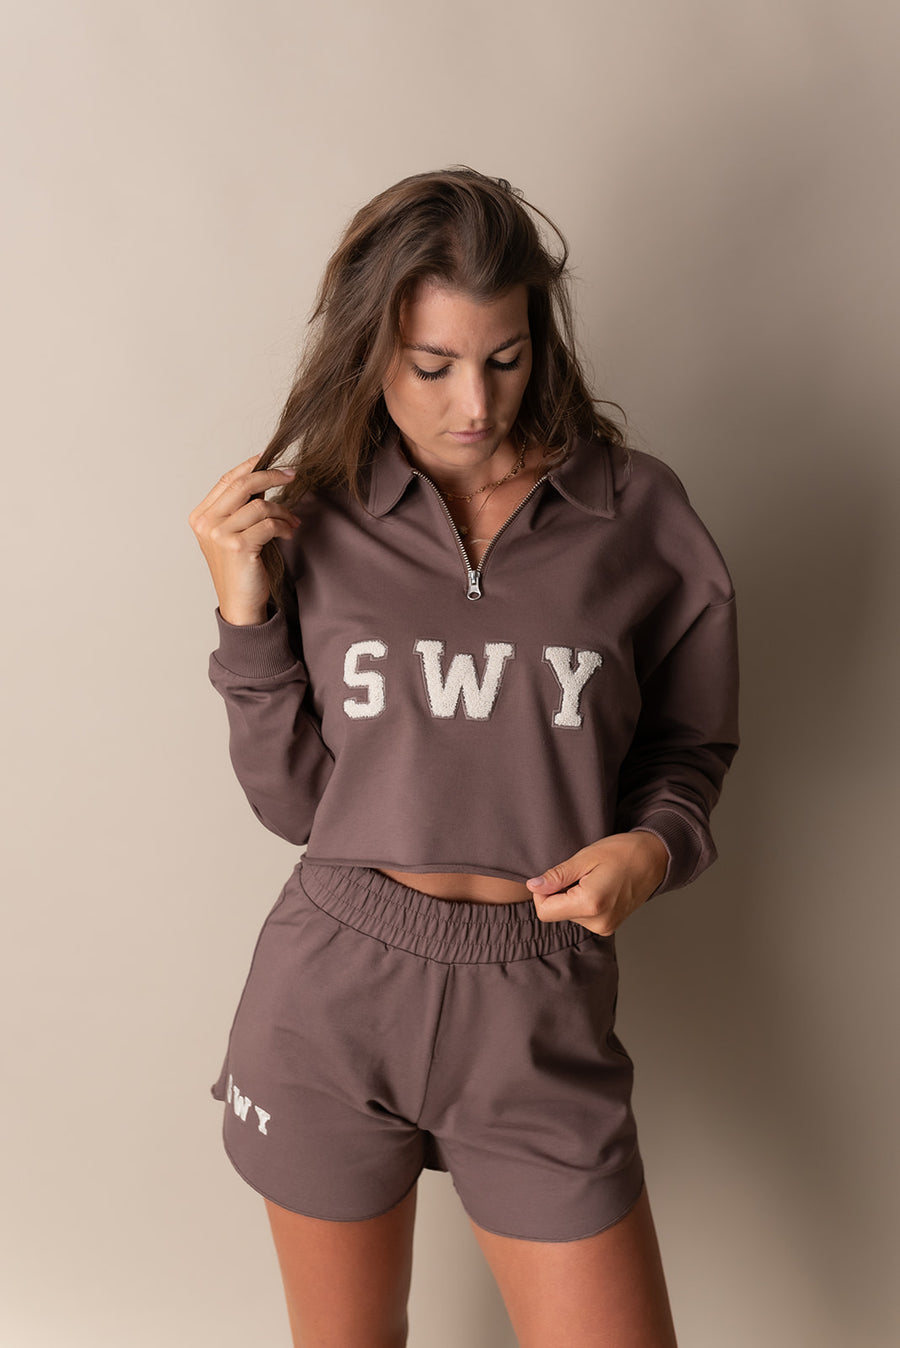 Swy comfortable long sleeve Cheer crop top in brown color soft material designed to match the Swy cheer shorts